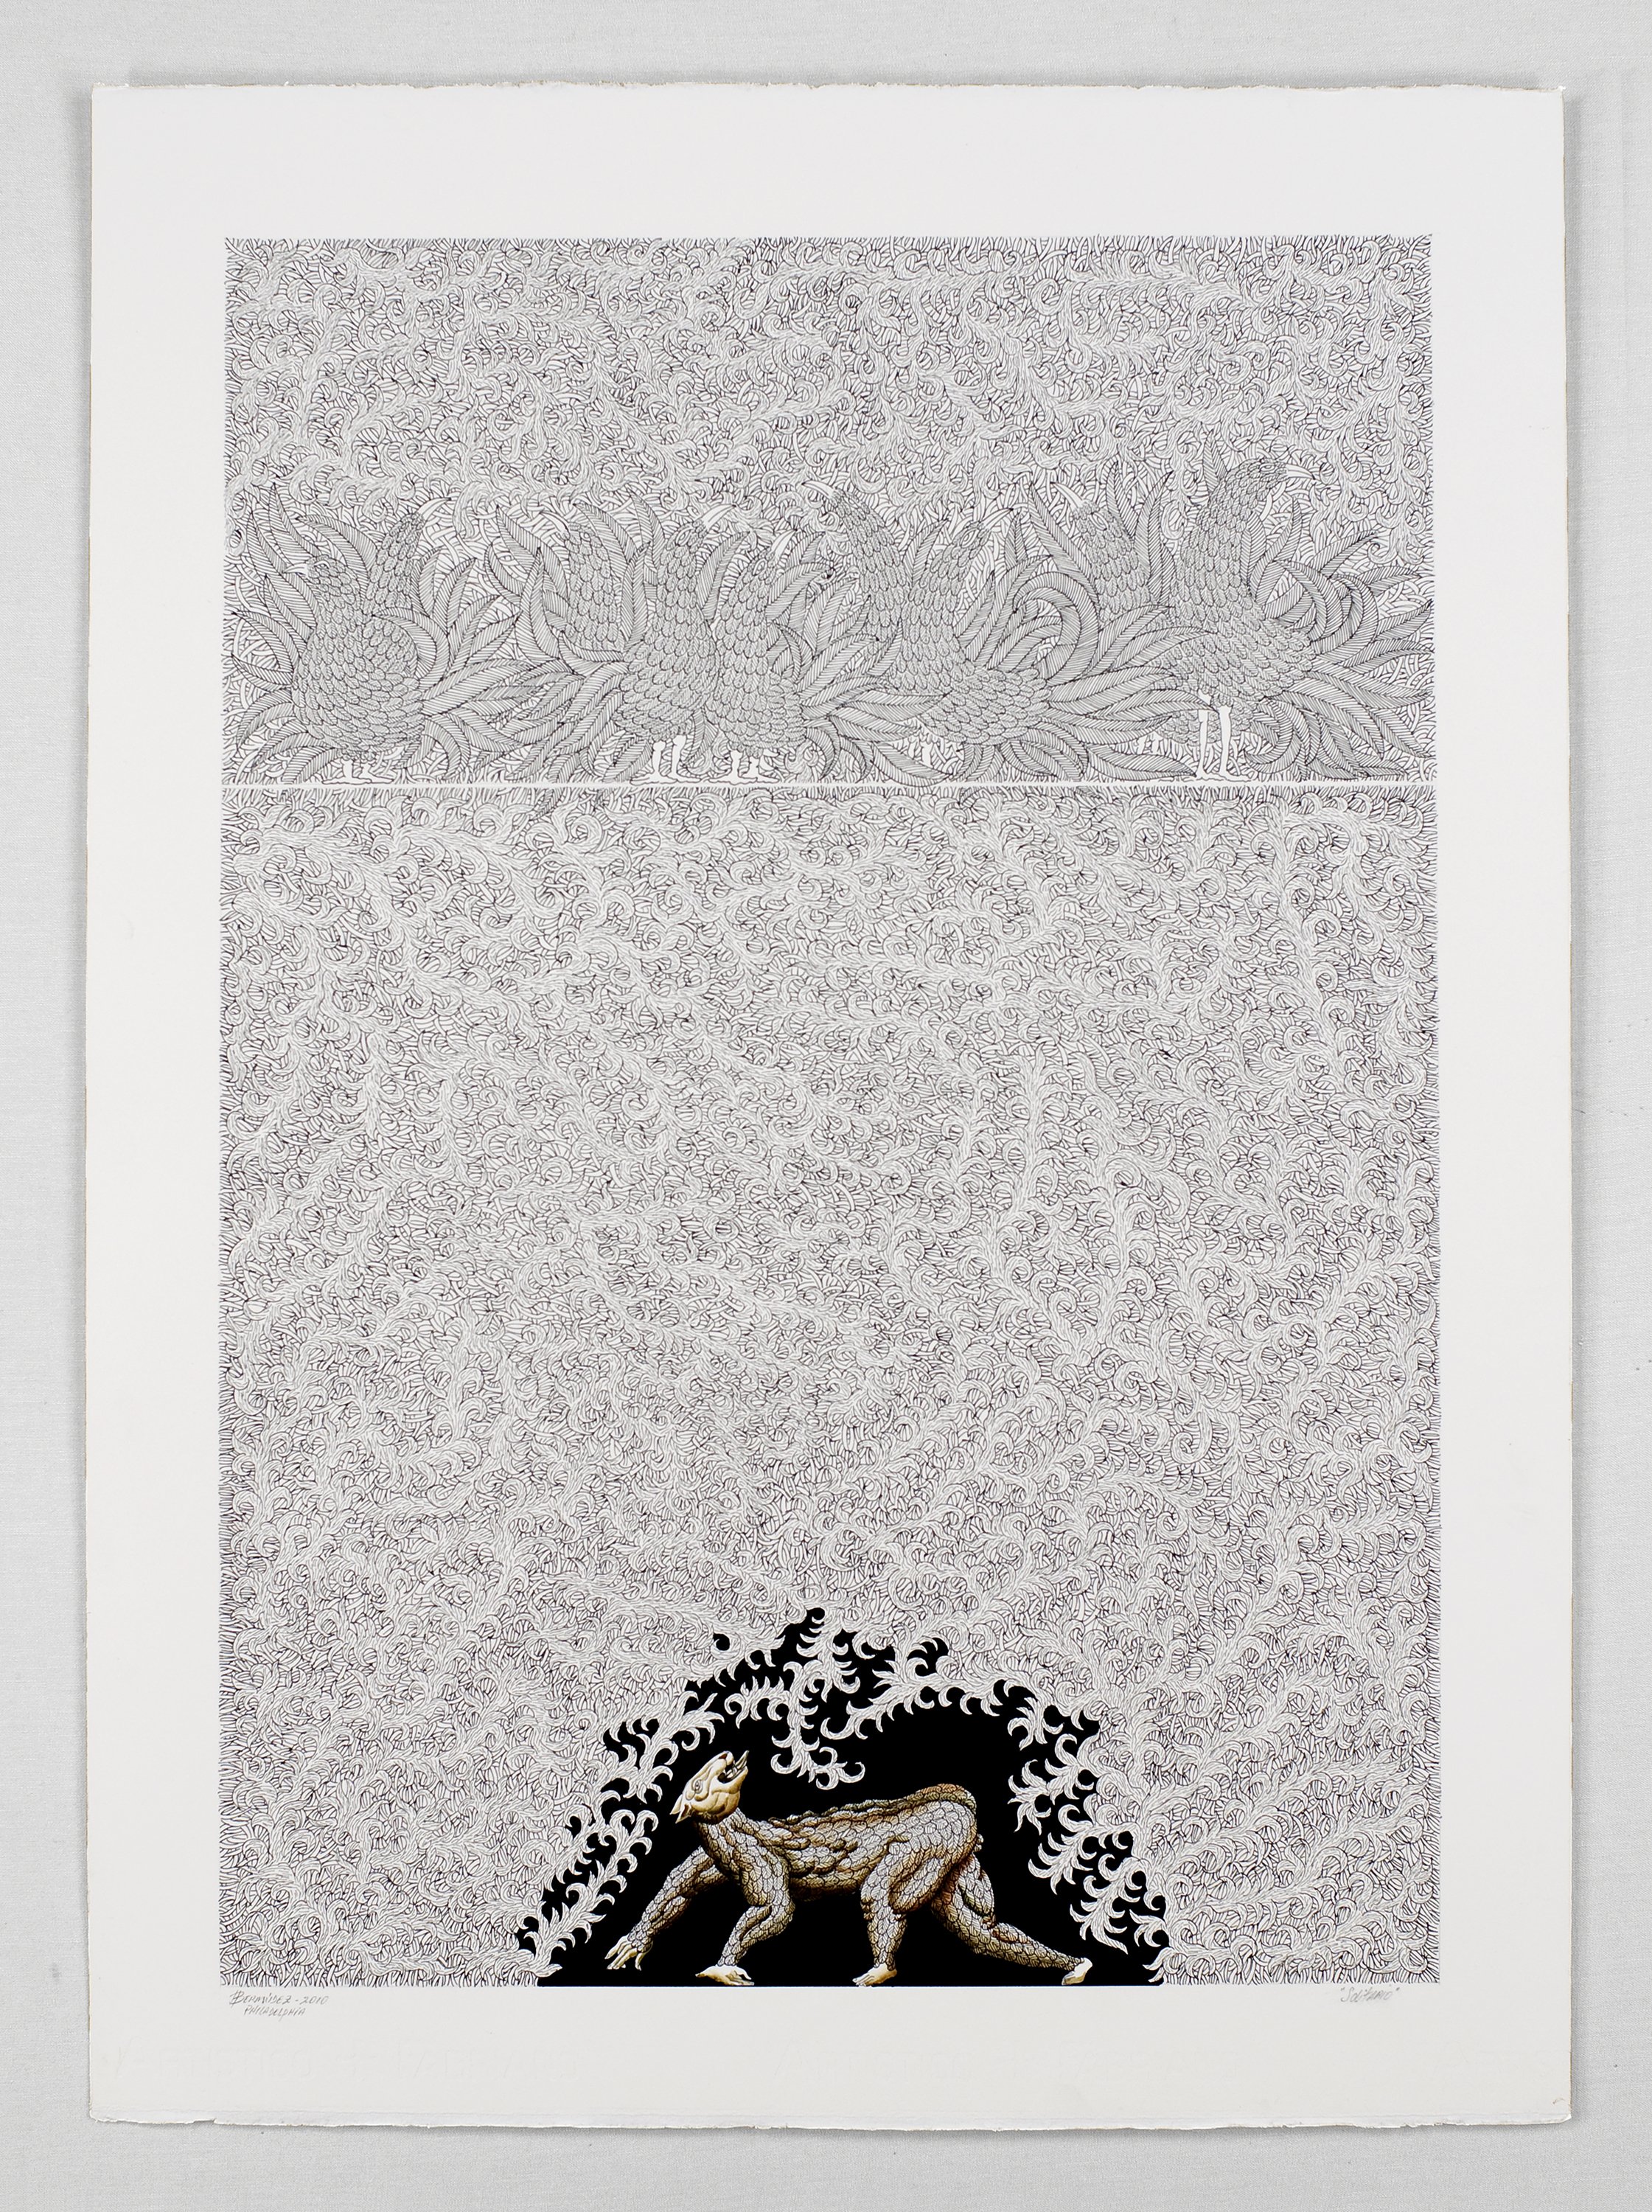 2010 Solitary 30in h x 22in w  ink on pape_Hbermudez.jpg